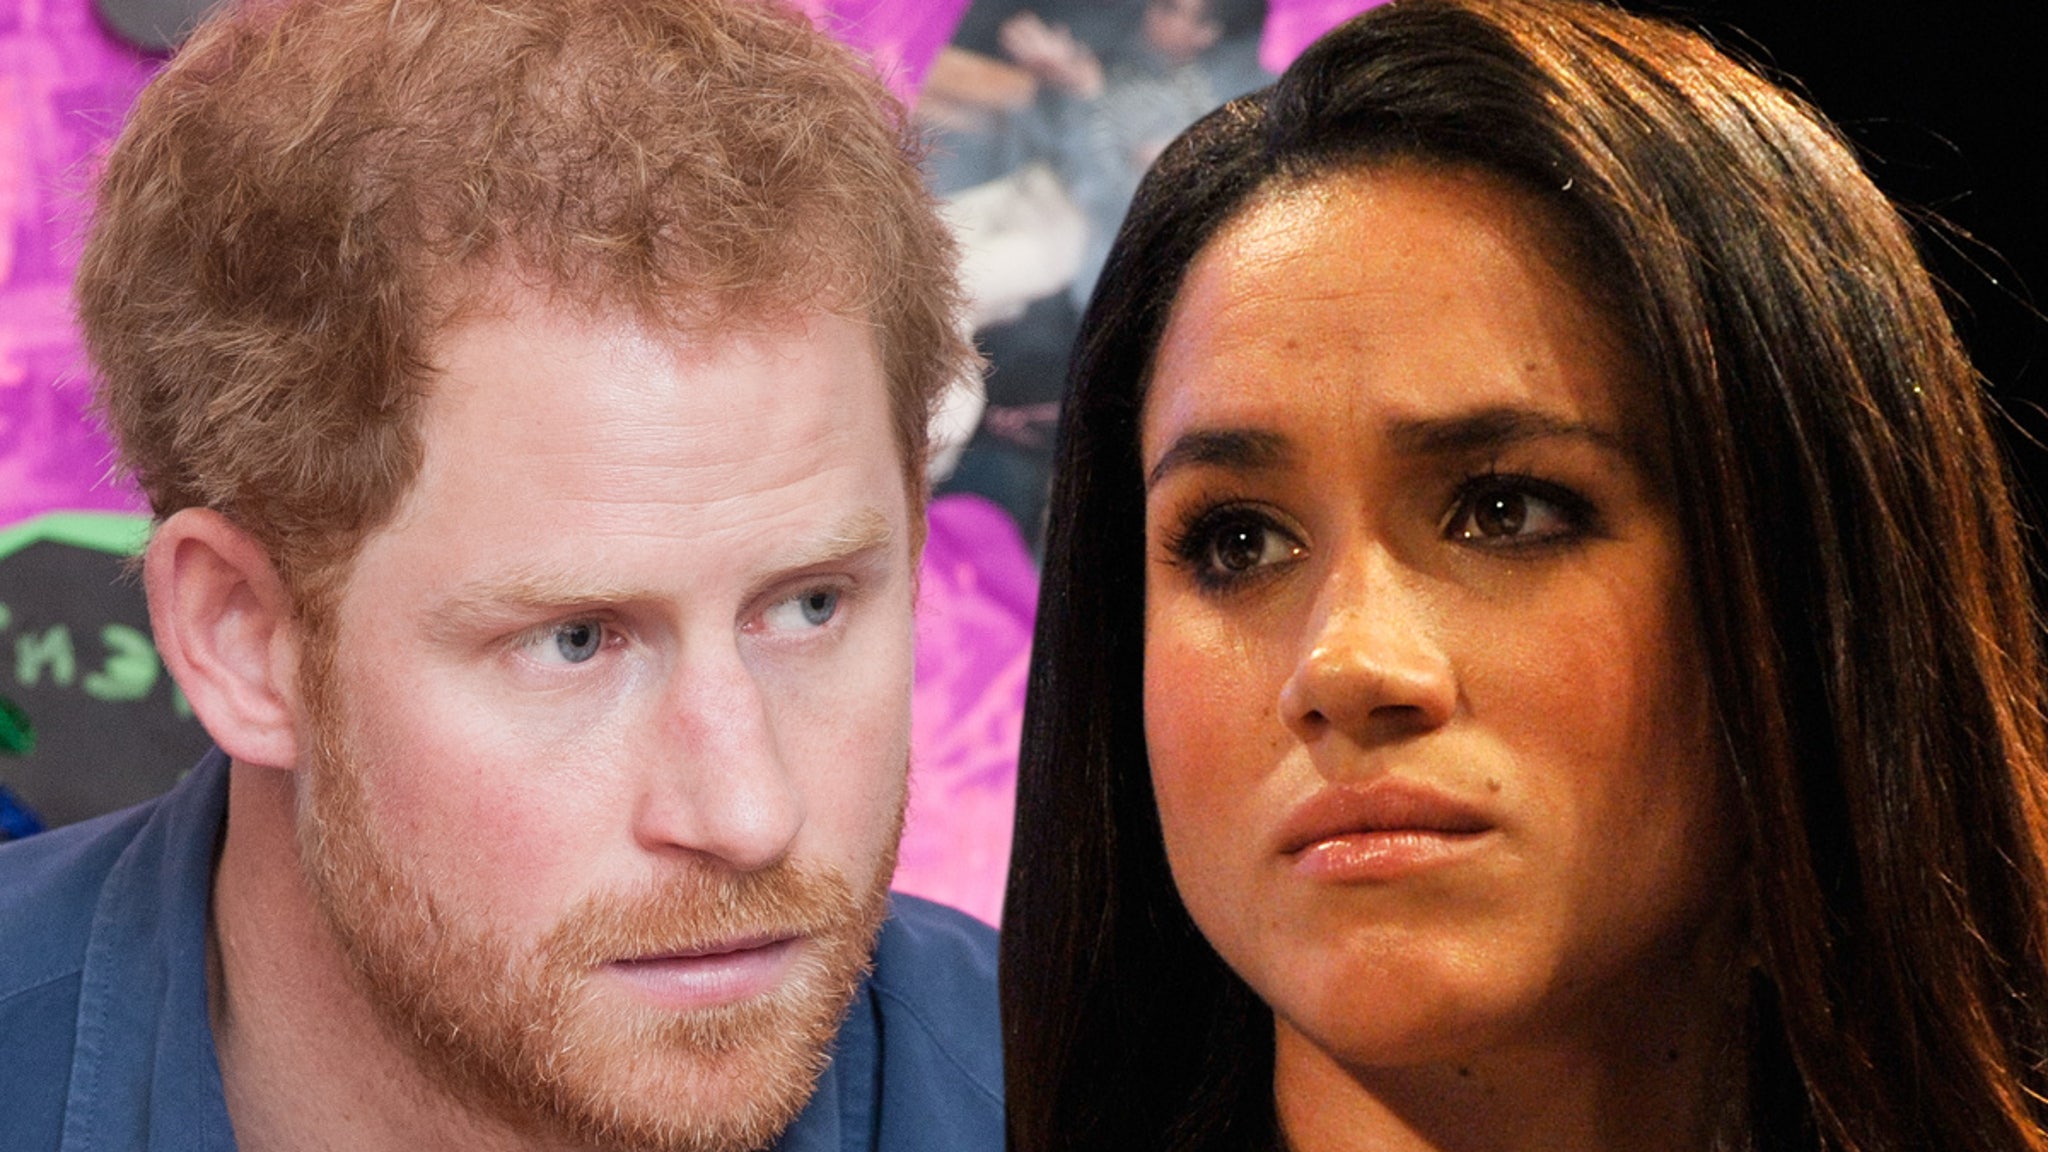 Prince Harry and Meghan Markle’s Montecito Estate Invaded by Invaders